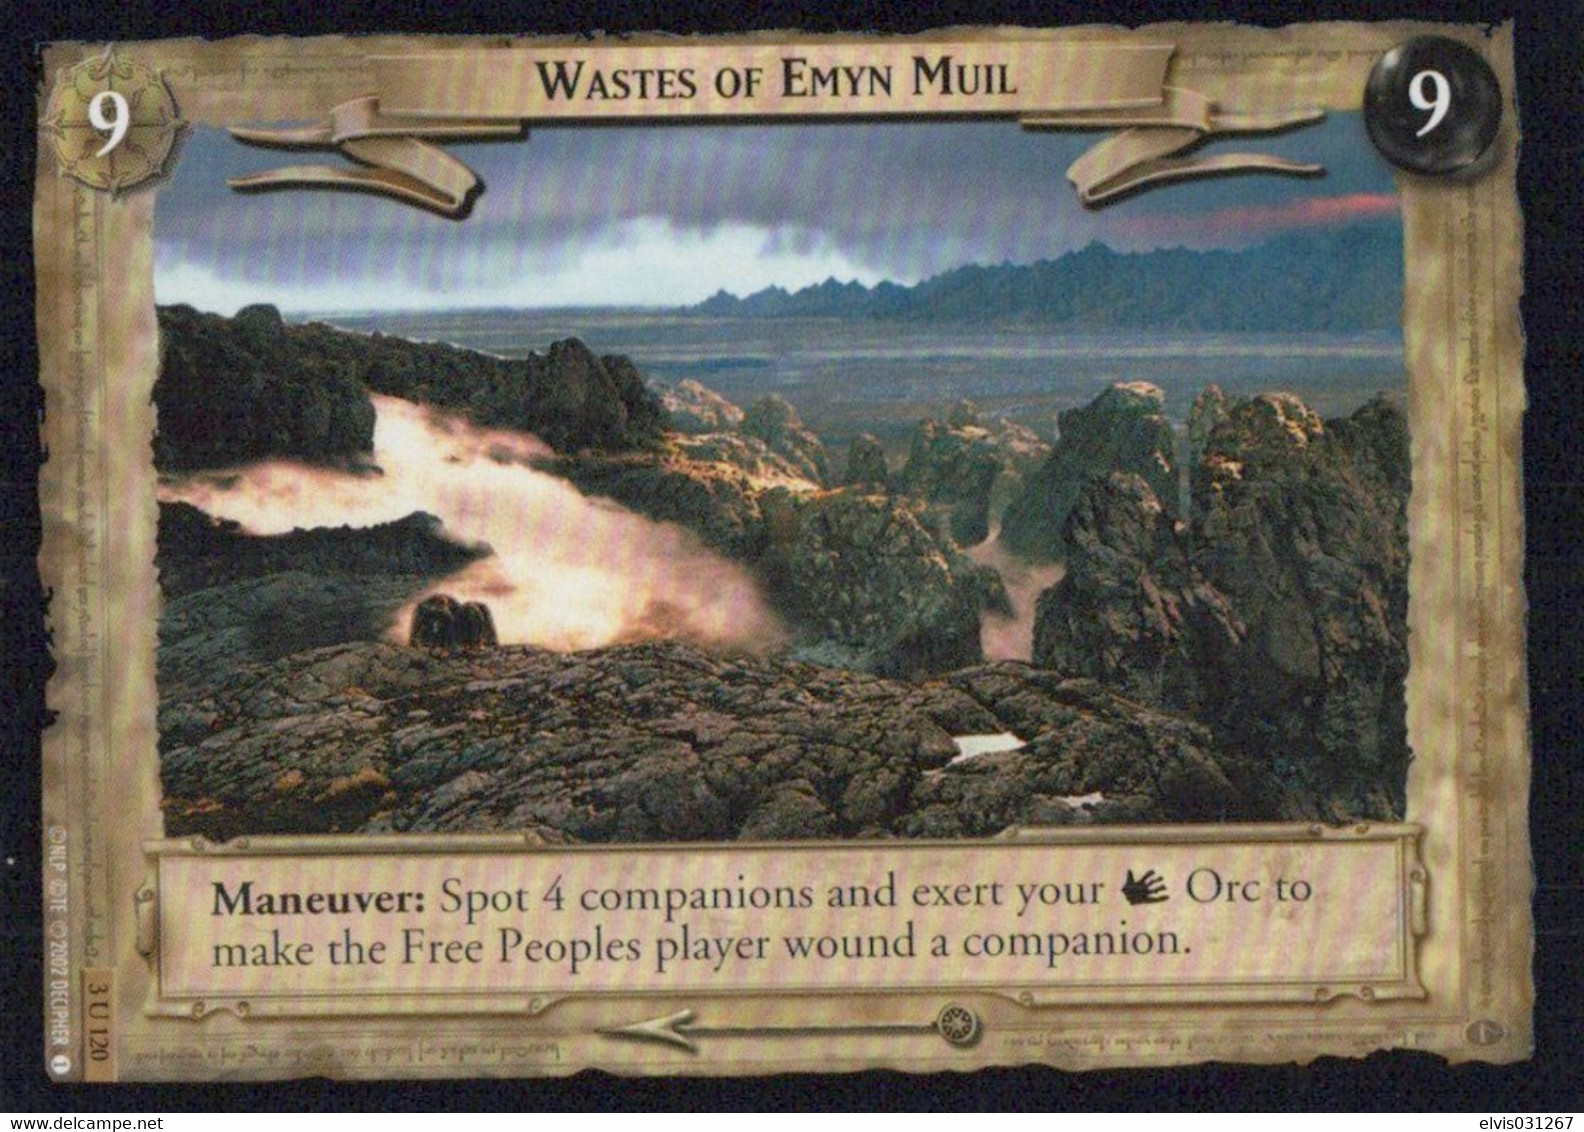 Vintage The Lord Of The Rings: #9-9 Wastes Of Emyn Muil - EN - 2001-2004 - Mint Condition - Trading Card Game - Lord Of The Rings